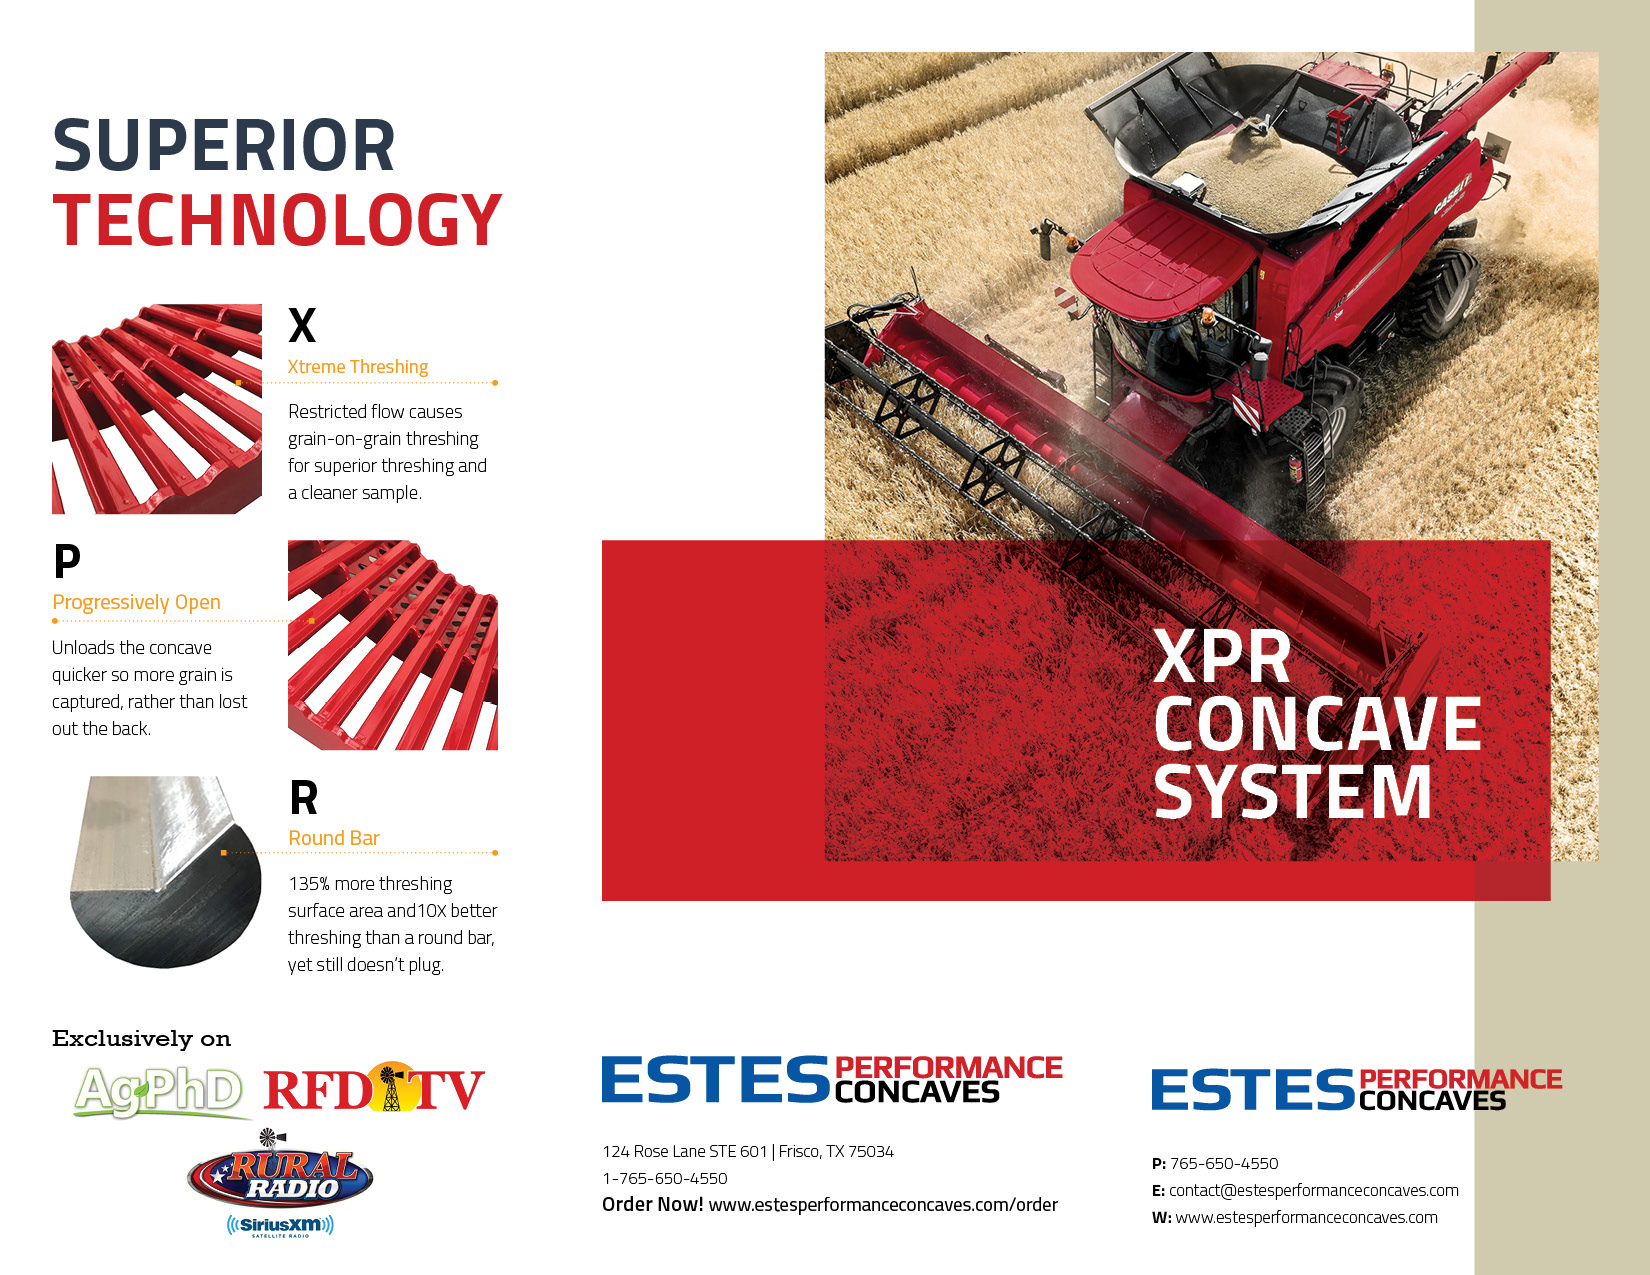 Case IH XPR Front